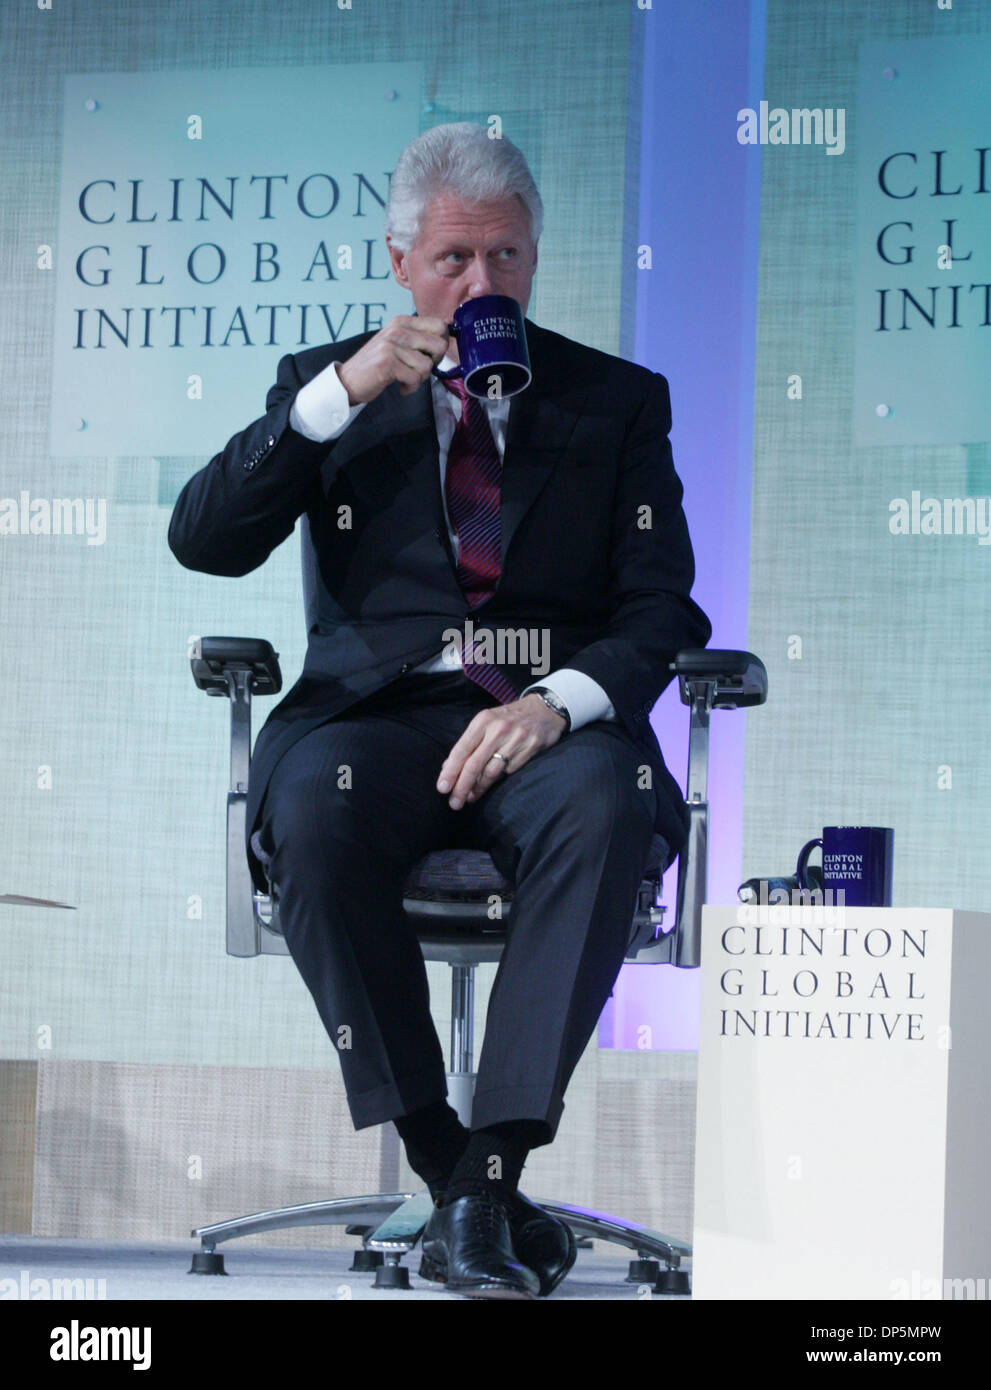 Sep 20, 2006; New York, NY, USA; 42nd President of the United States BILL CLINTON at the Clinton Global Initiative 2006 Annual Meeting held at the New York Sheraton Hotel Mandatory Credit: Photo by Nancy Kaszerman/ZUMA Press. (©) Copyright 2006 by Nancy Kaszerman Stock Photo